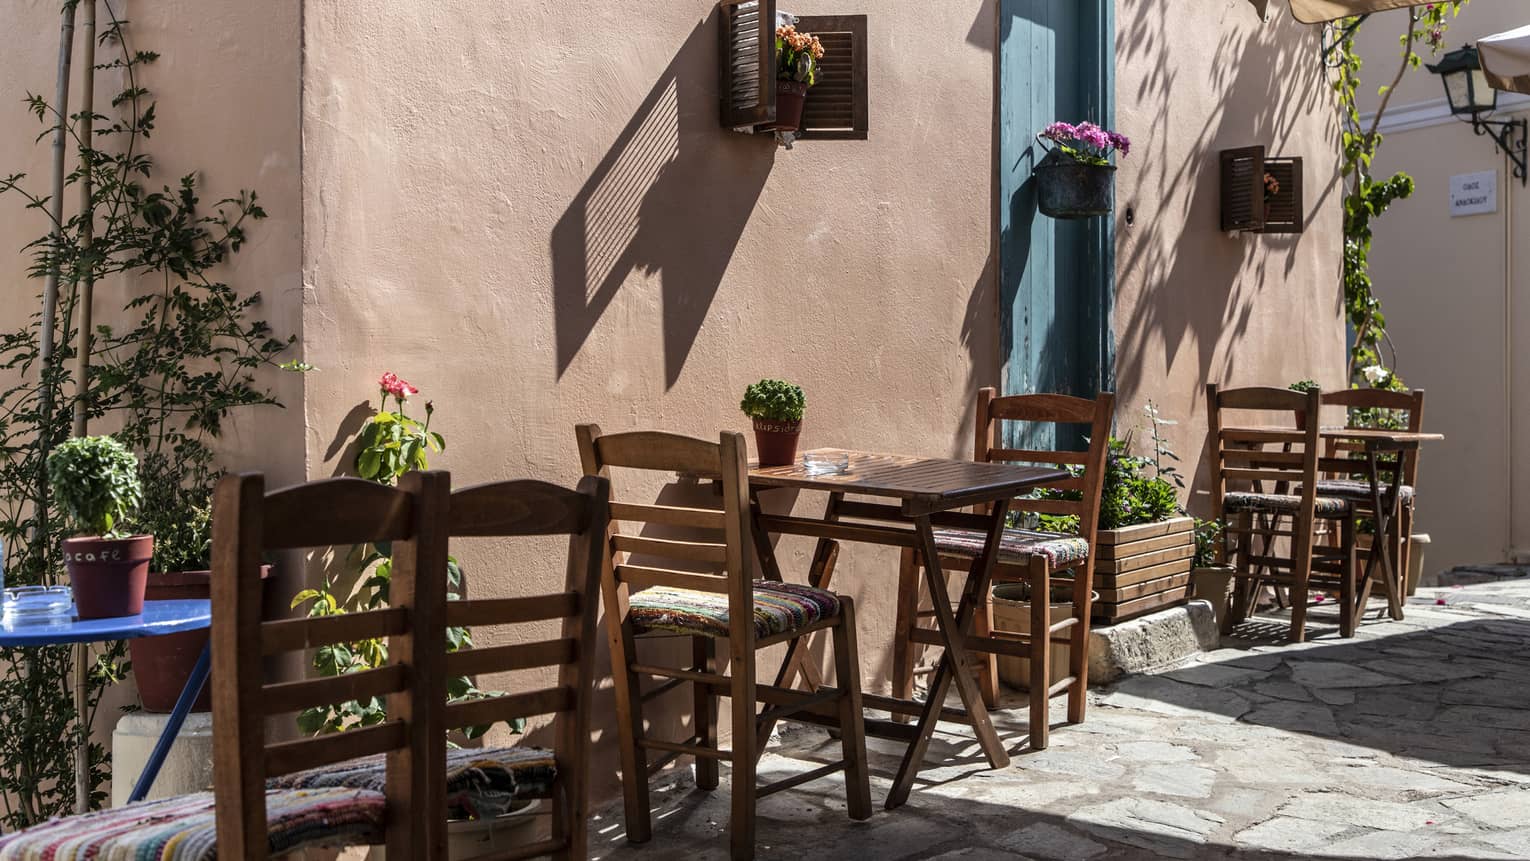 In terracotta-walled alley adorned with flowers and vines, wooden tables and chairs cast shadows on the cobblestone street.  